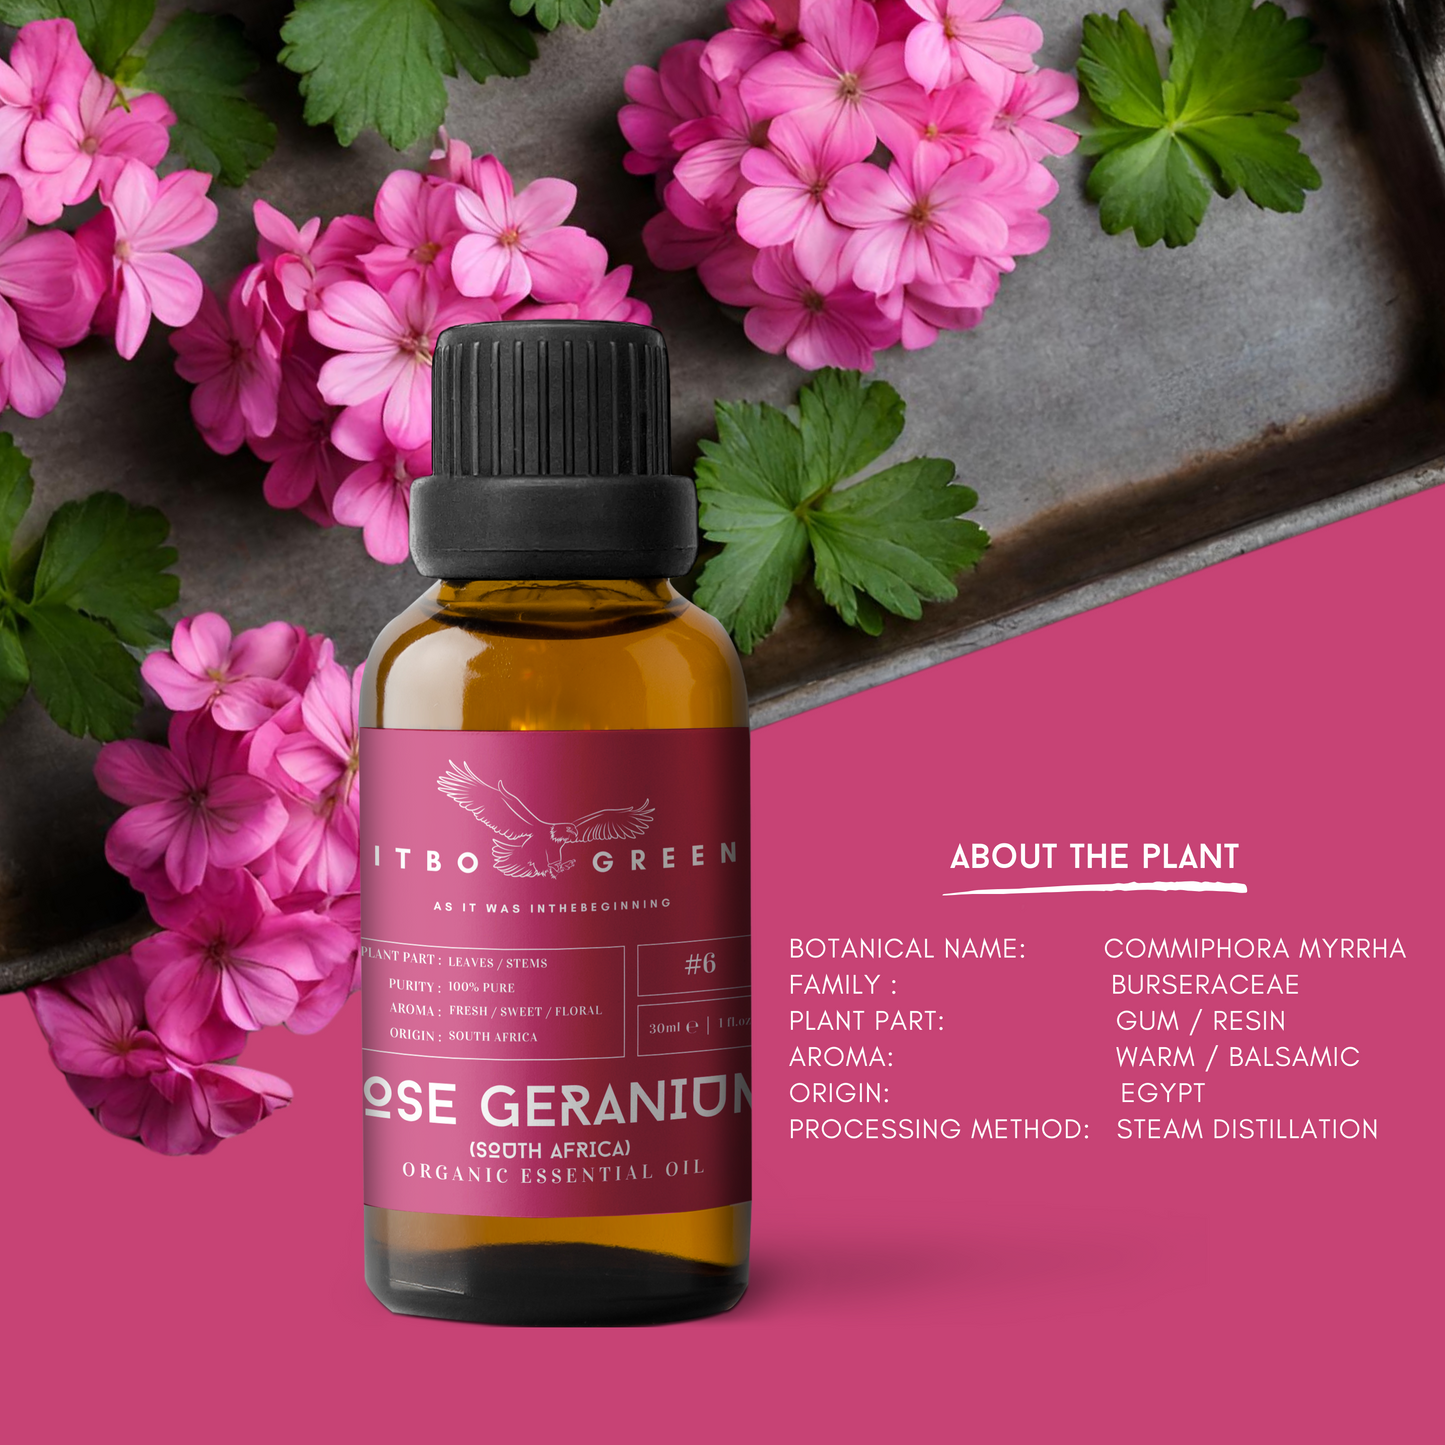 Organic Rose Geranium (South Africa) Essential Oil | 30ml / 1oz UV Bottle | Pure Woody Oil | Unblended | Aromatherapy | Vegan | Spirituality| Nature Heals - ITBO Green